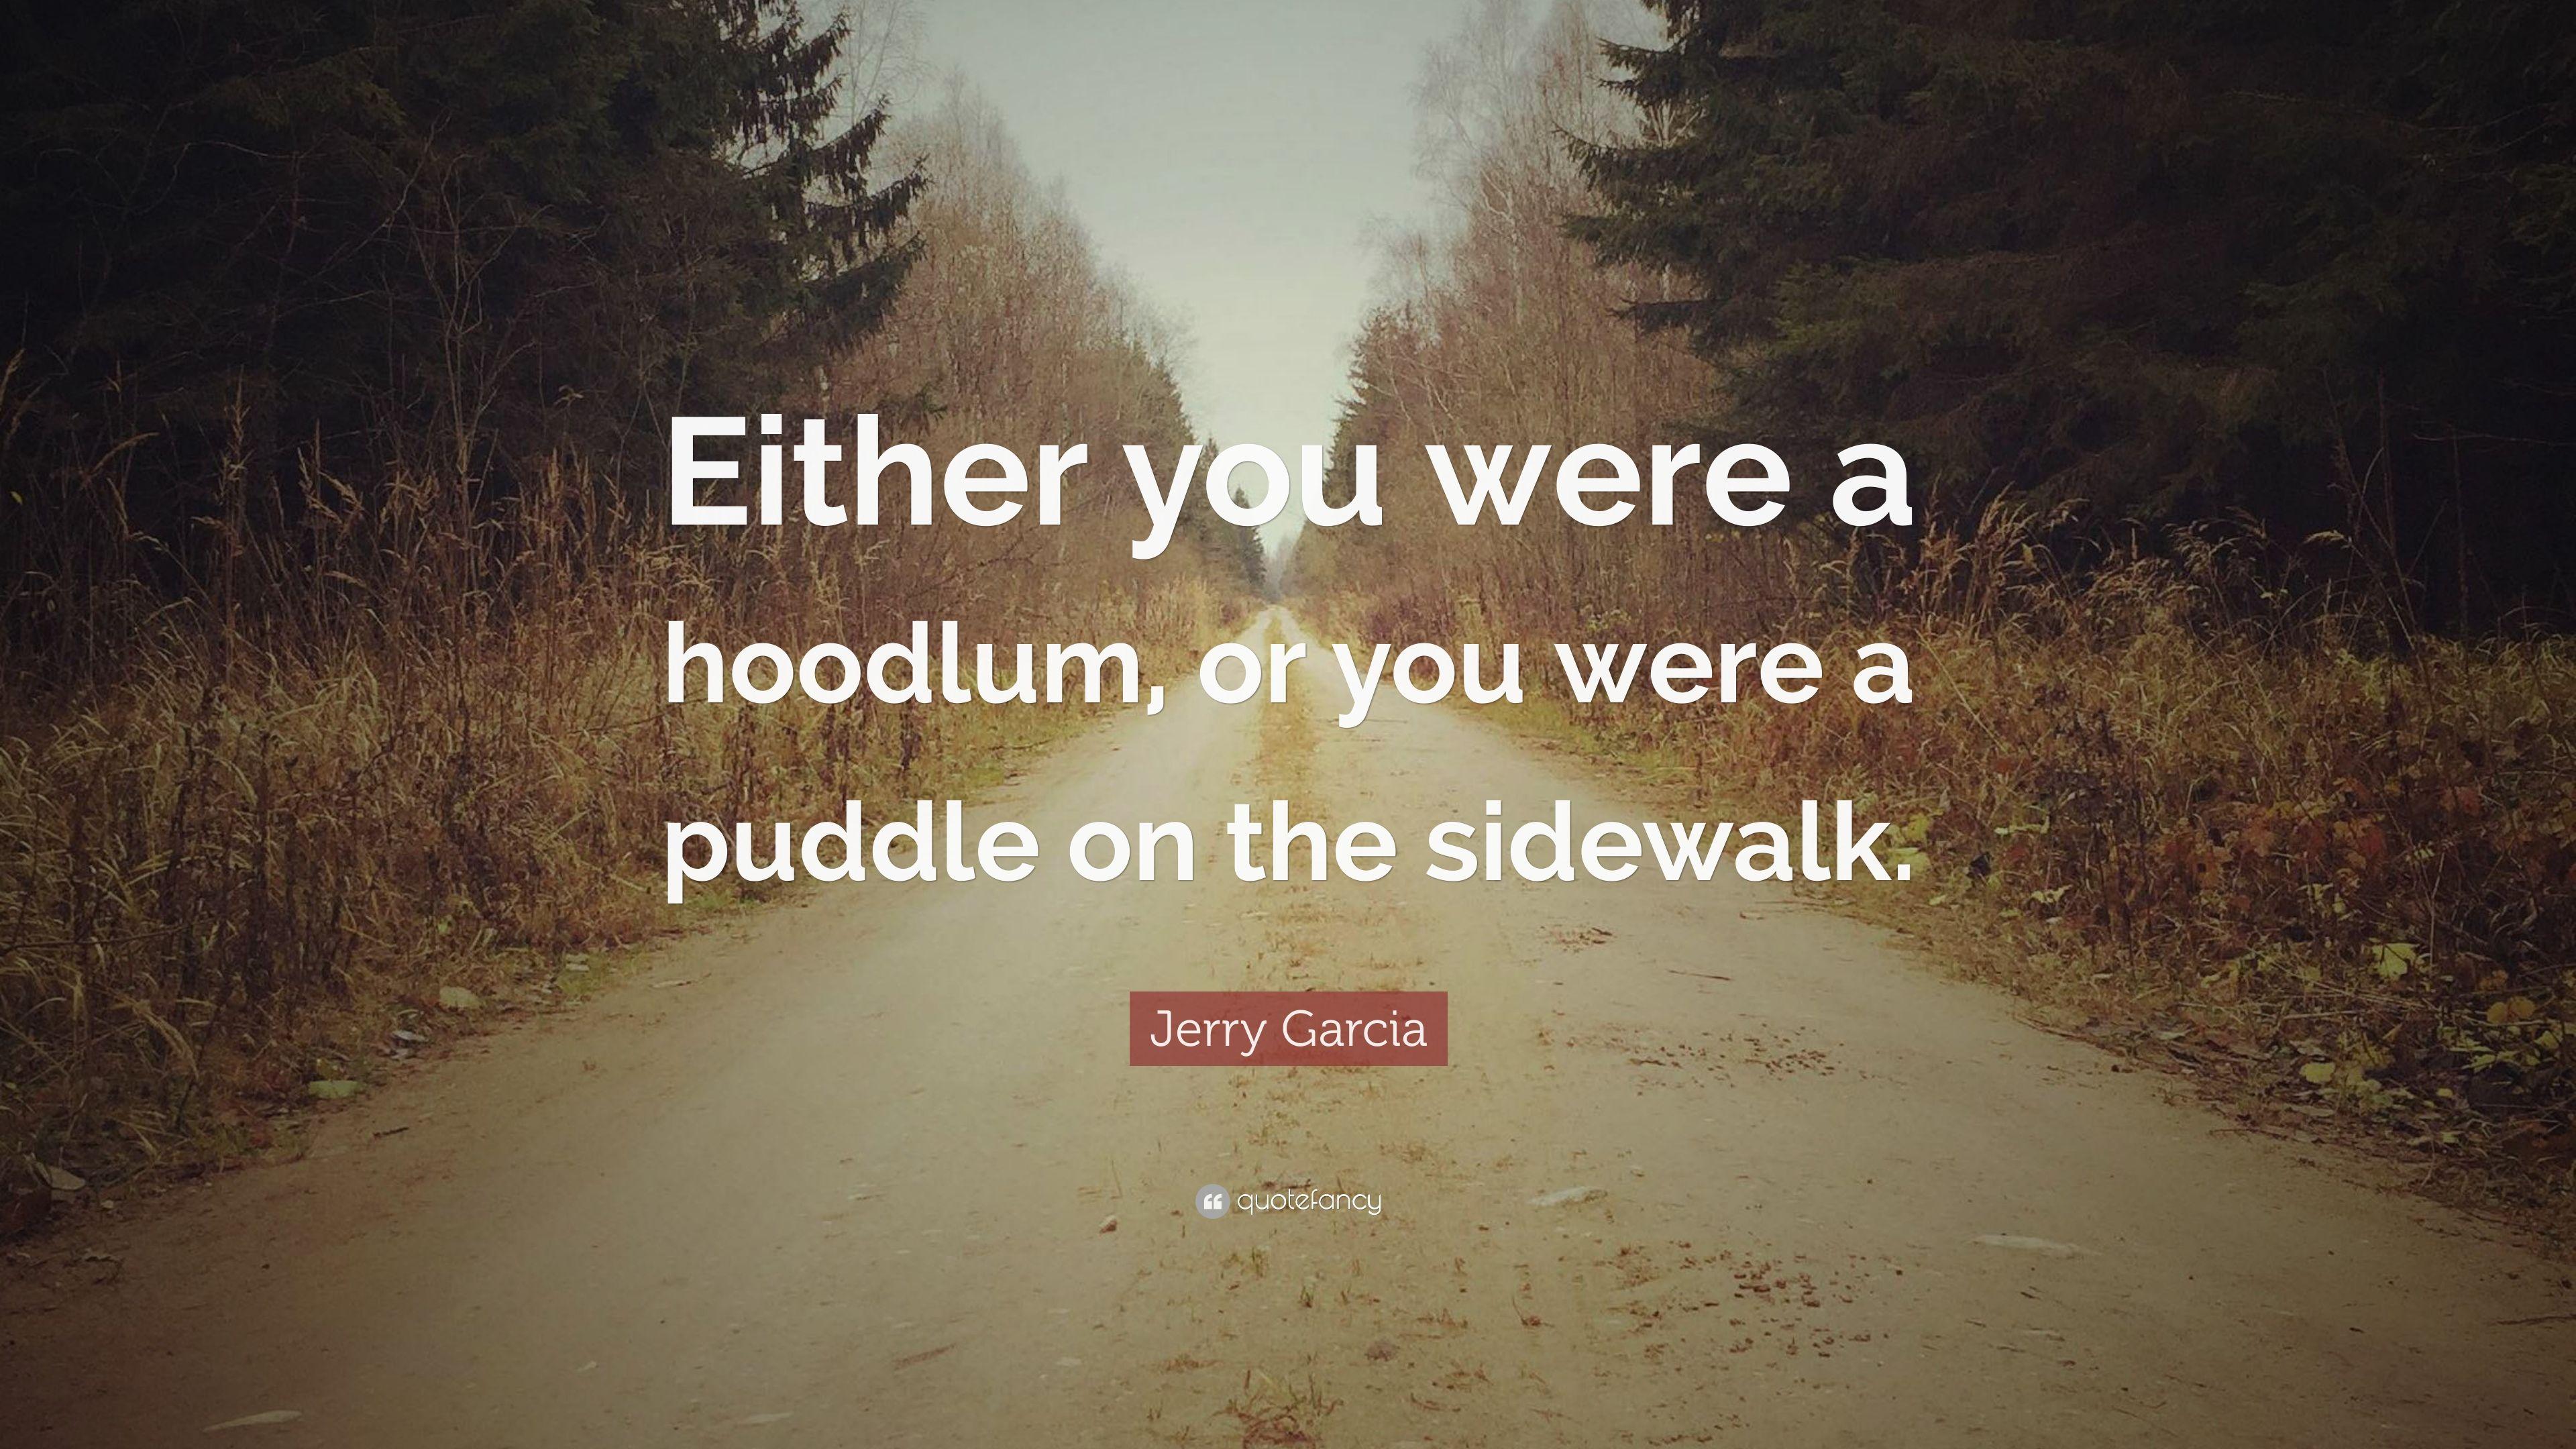 Jerry Garcia Quote: “Either you were a hoodlum, or you were a